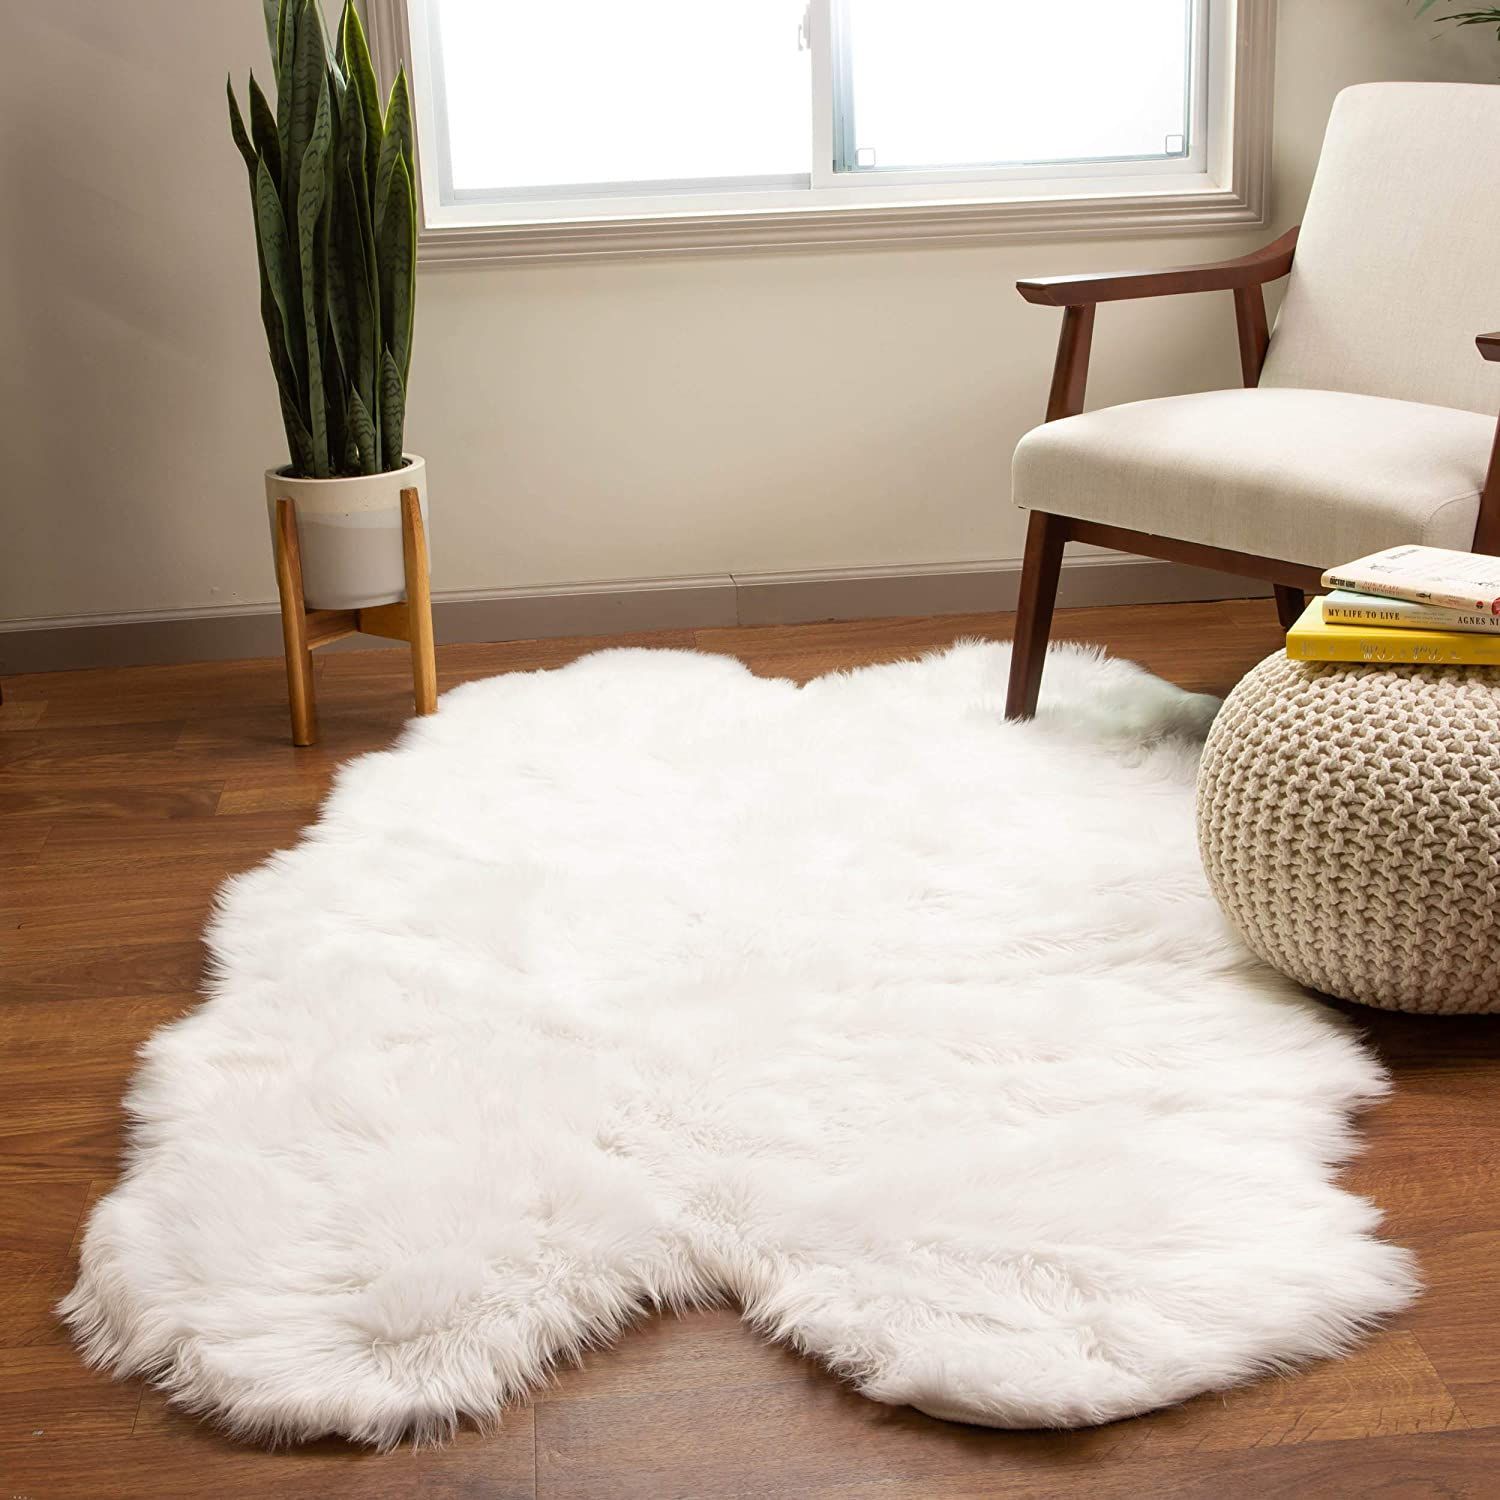 Soft Area Rugs To Make Your Home Cozy, Large Red Plush Rug